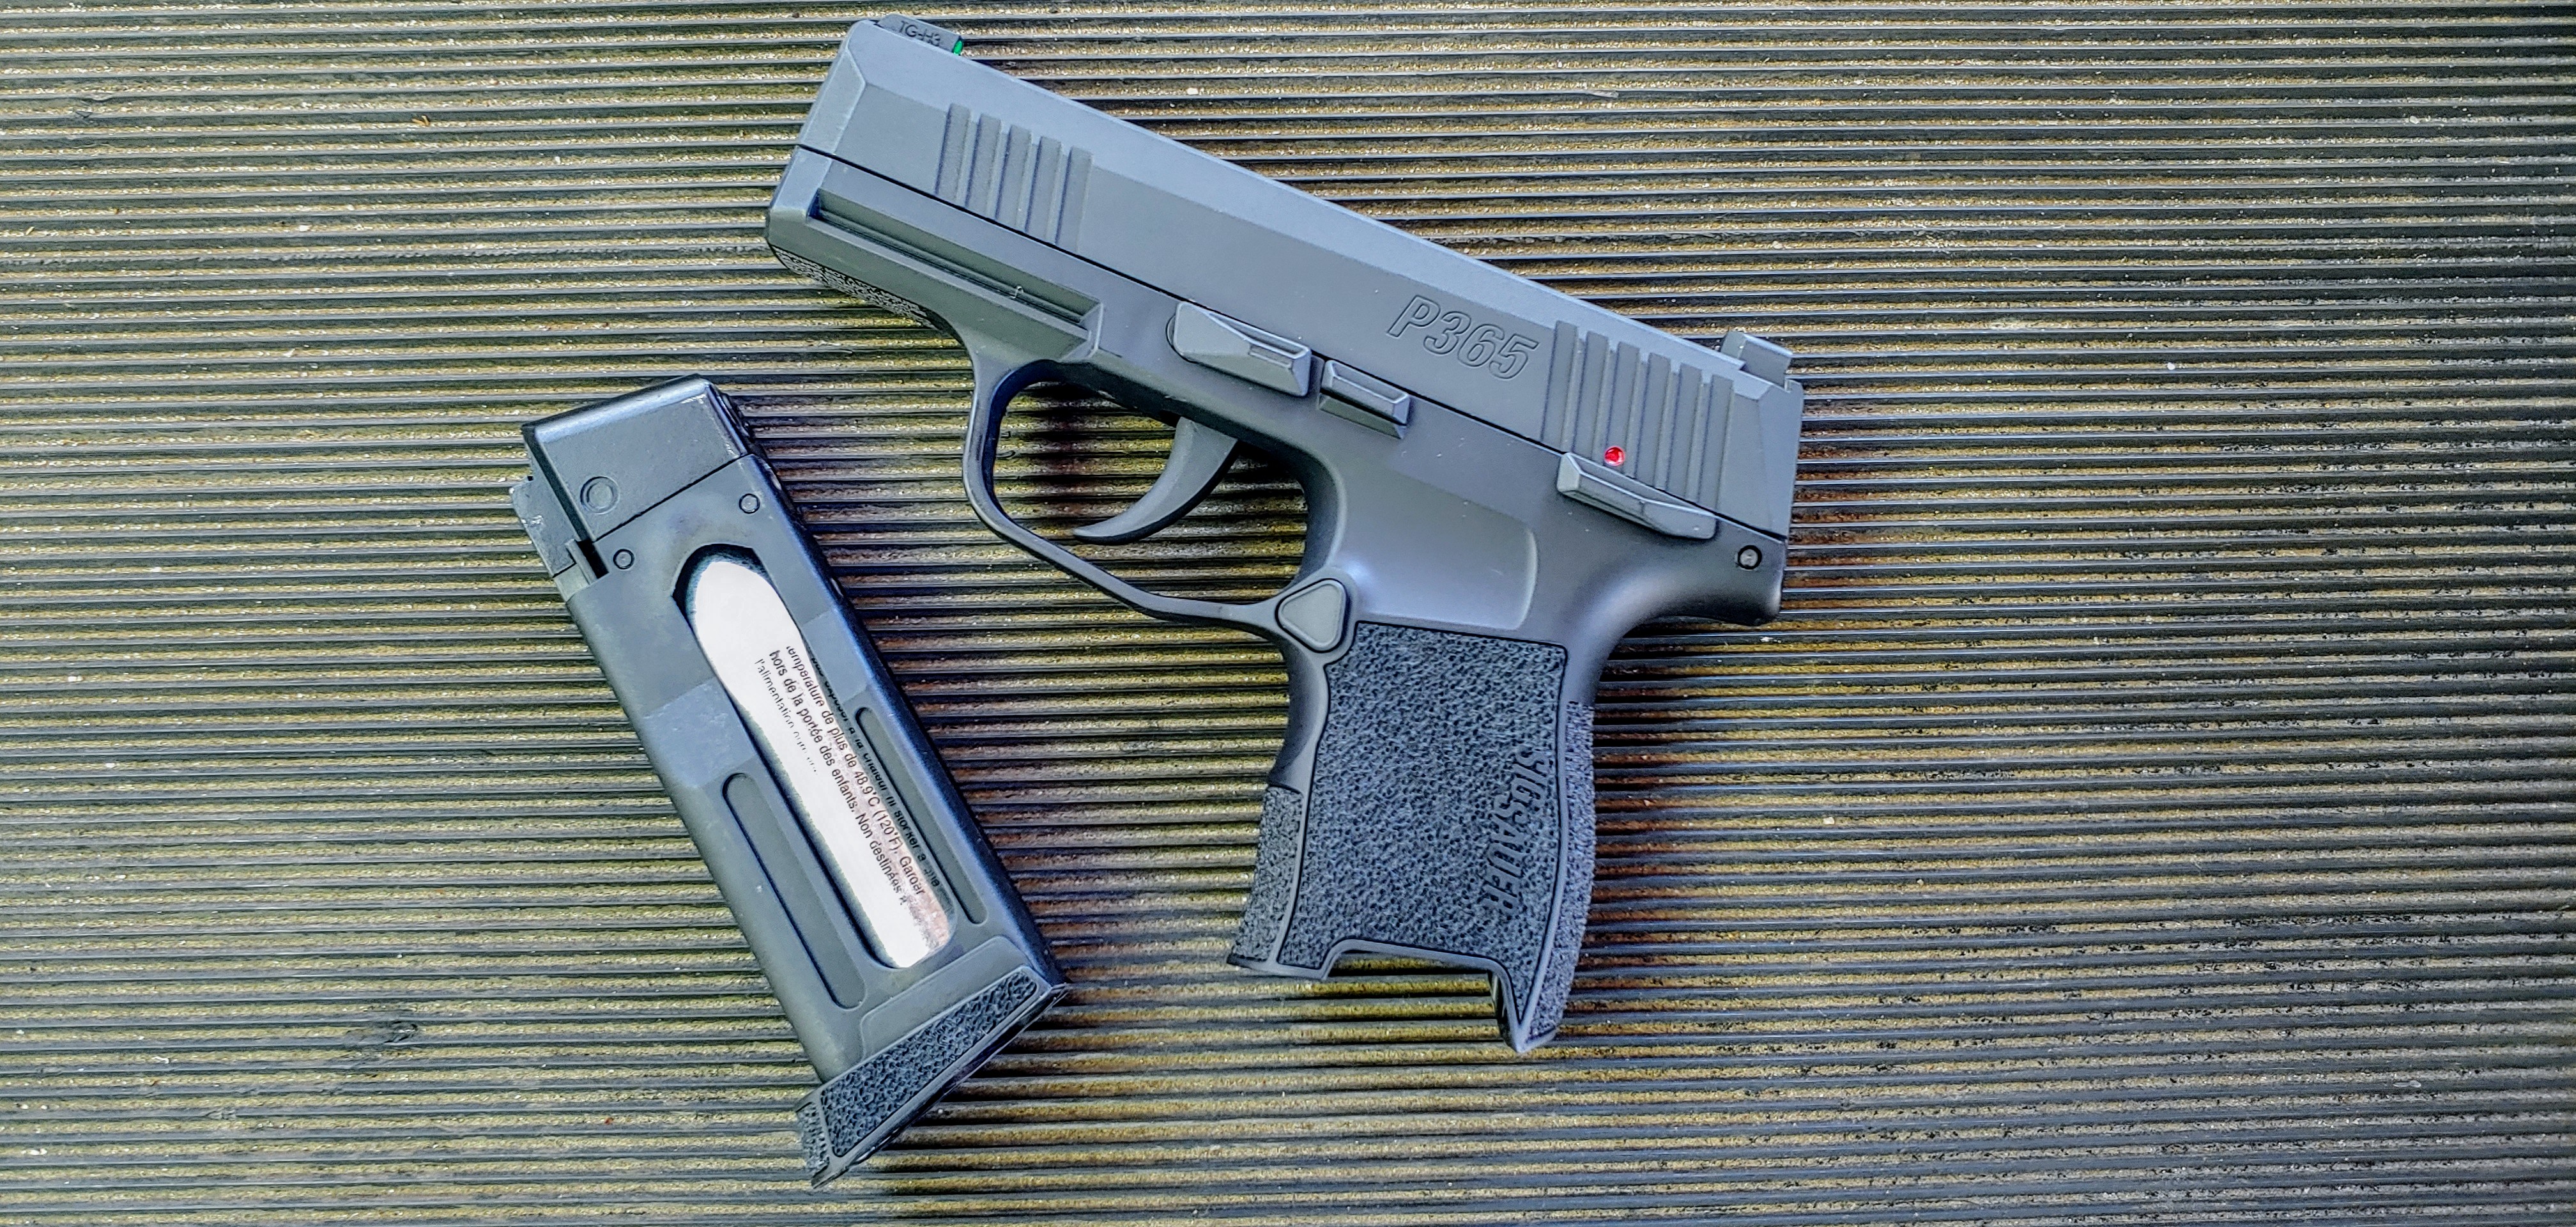 SIG SAUER, SIG P365, P365, P365 SAS, P365 XL, SIG, concealed carry, CrossBreed Holsters, SIG P365 Micro-Compact, SAS, best gun for concealed carry, handgun of the year, P365 Air Gun, IWB, OWB, holsters